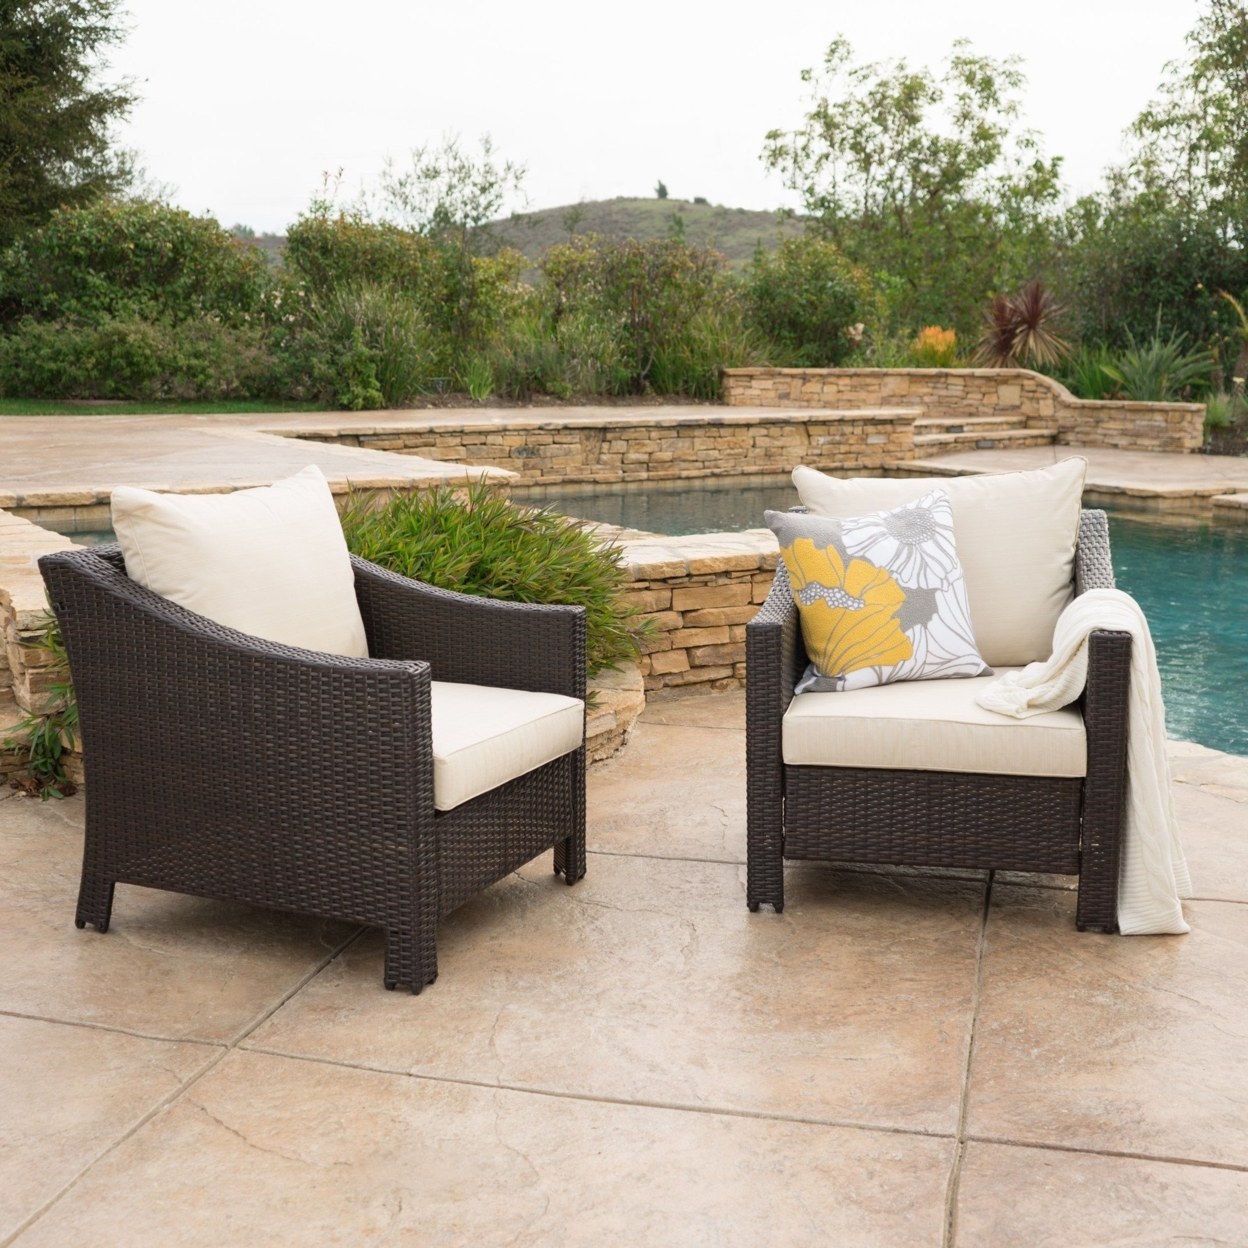 Cortez Outdoor Wicker Club Chair With Water Resistant Cushions (Set Of 2) - MultiBrown/Beige